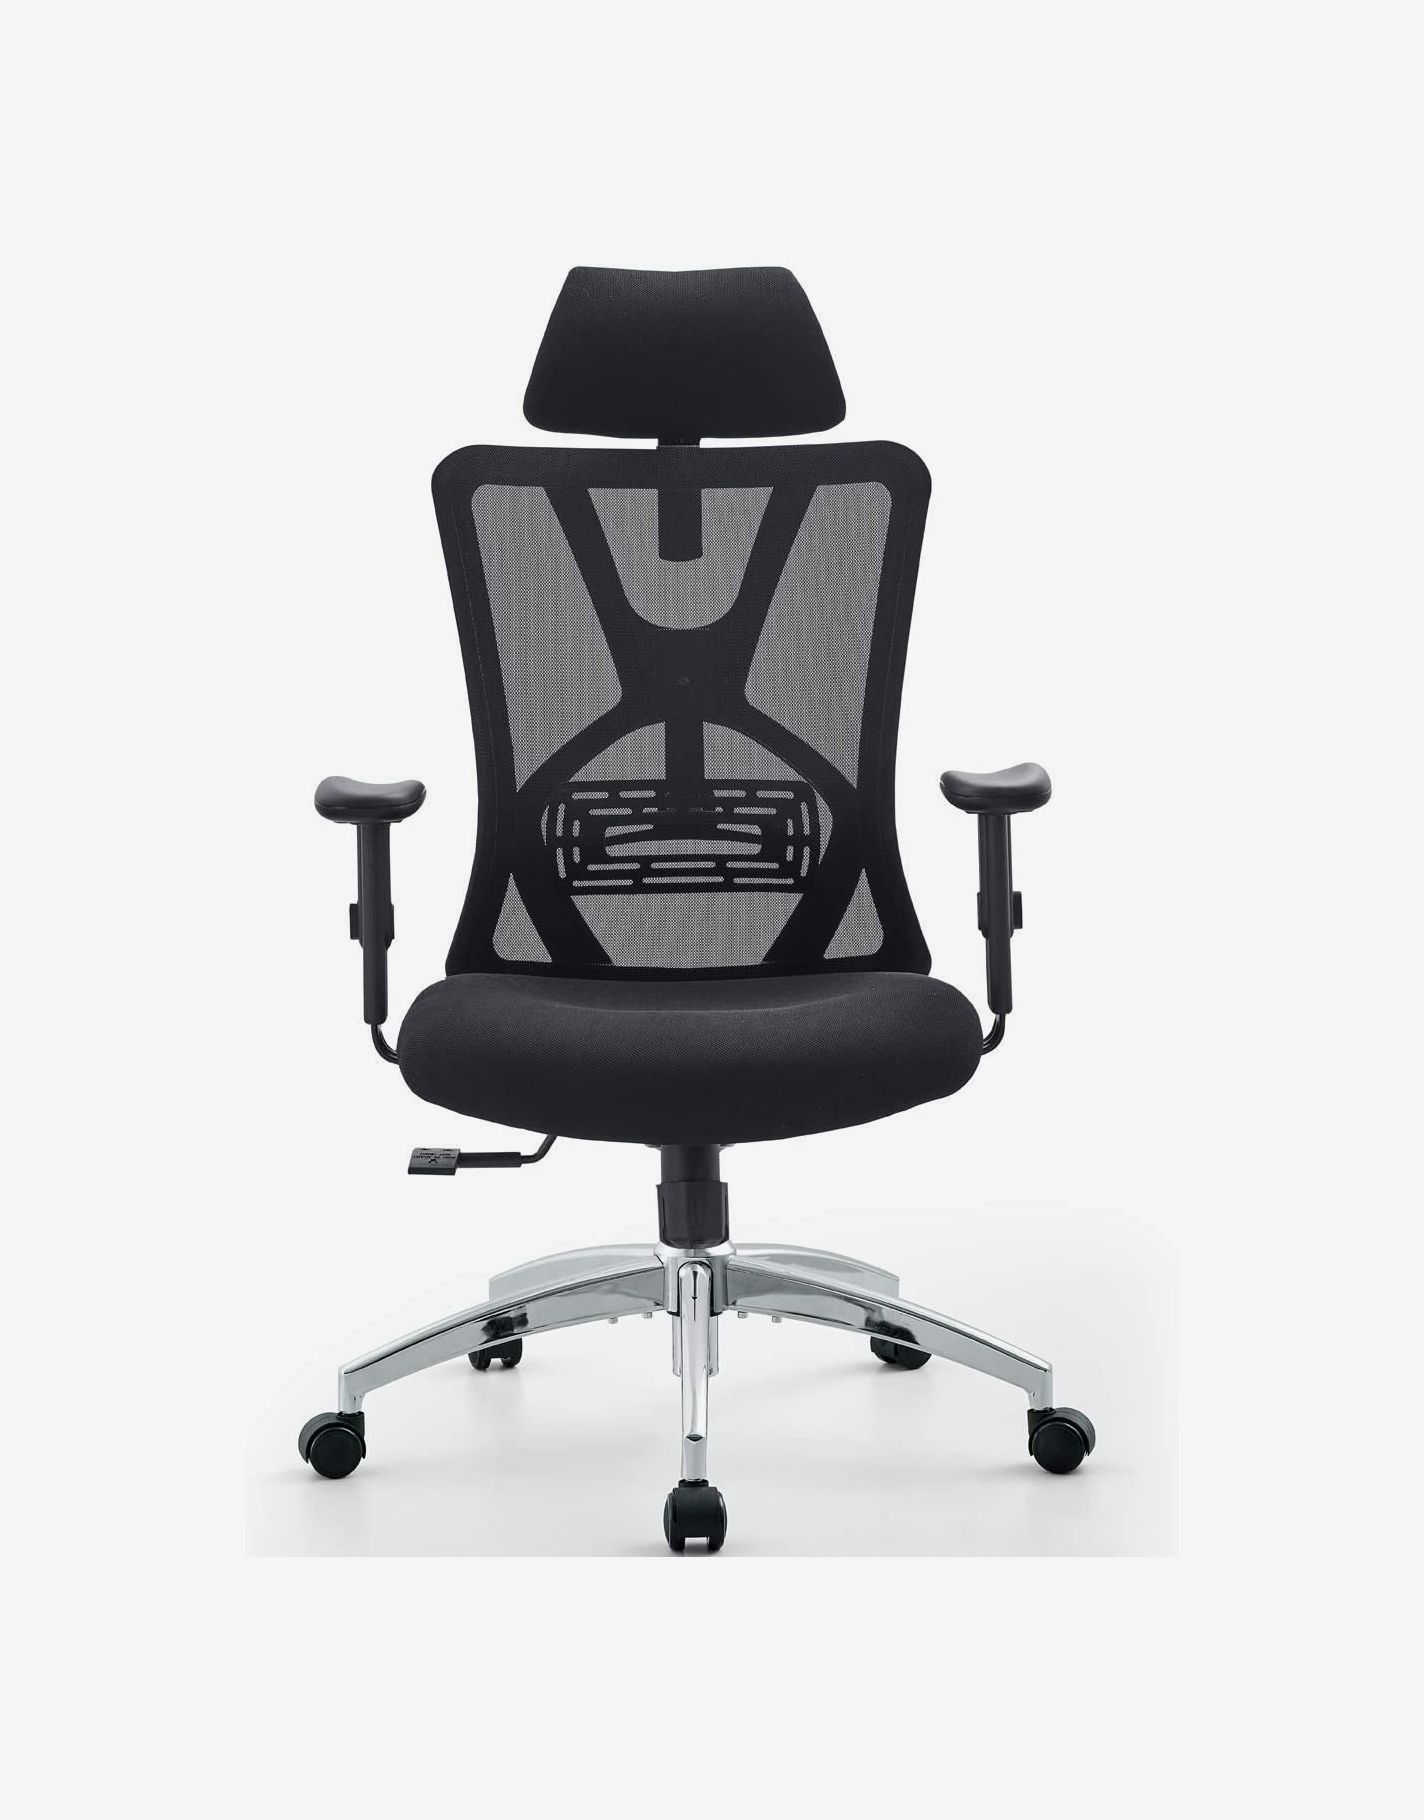 18 Best Ergonomic Office Chairs 2021, What Is The Best Home Office Chair